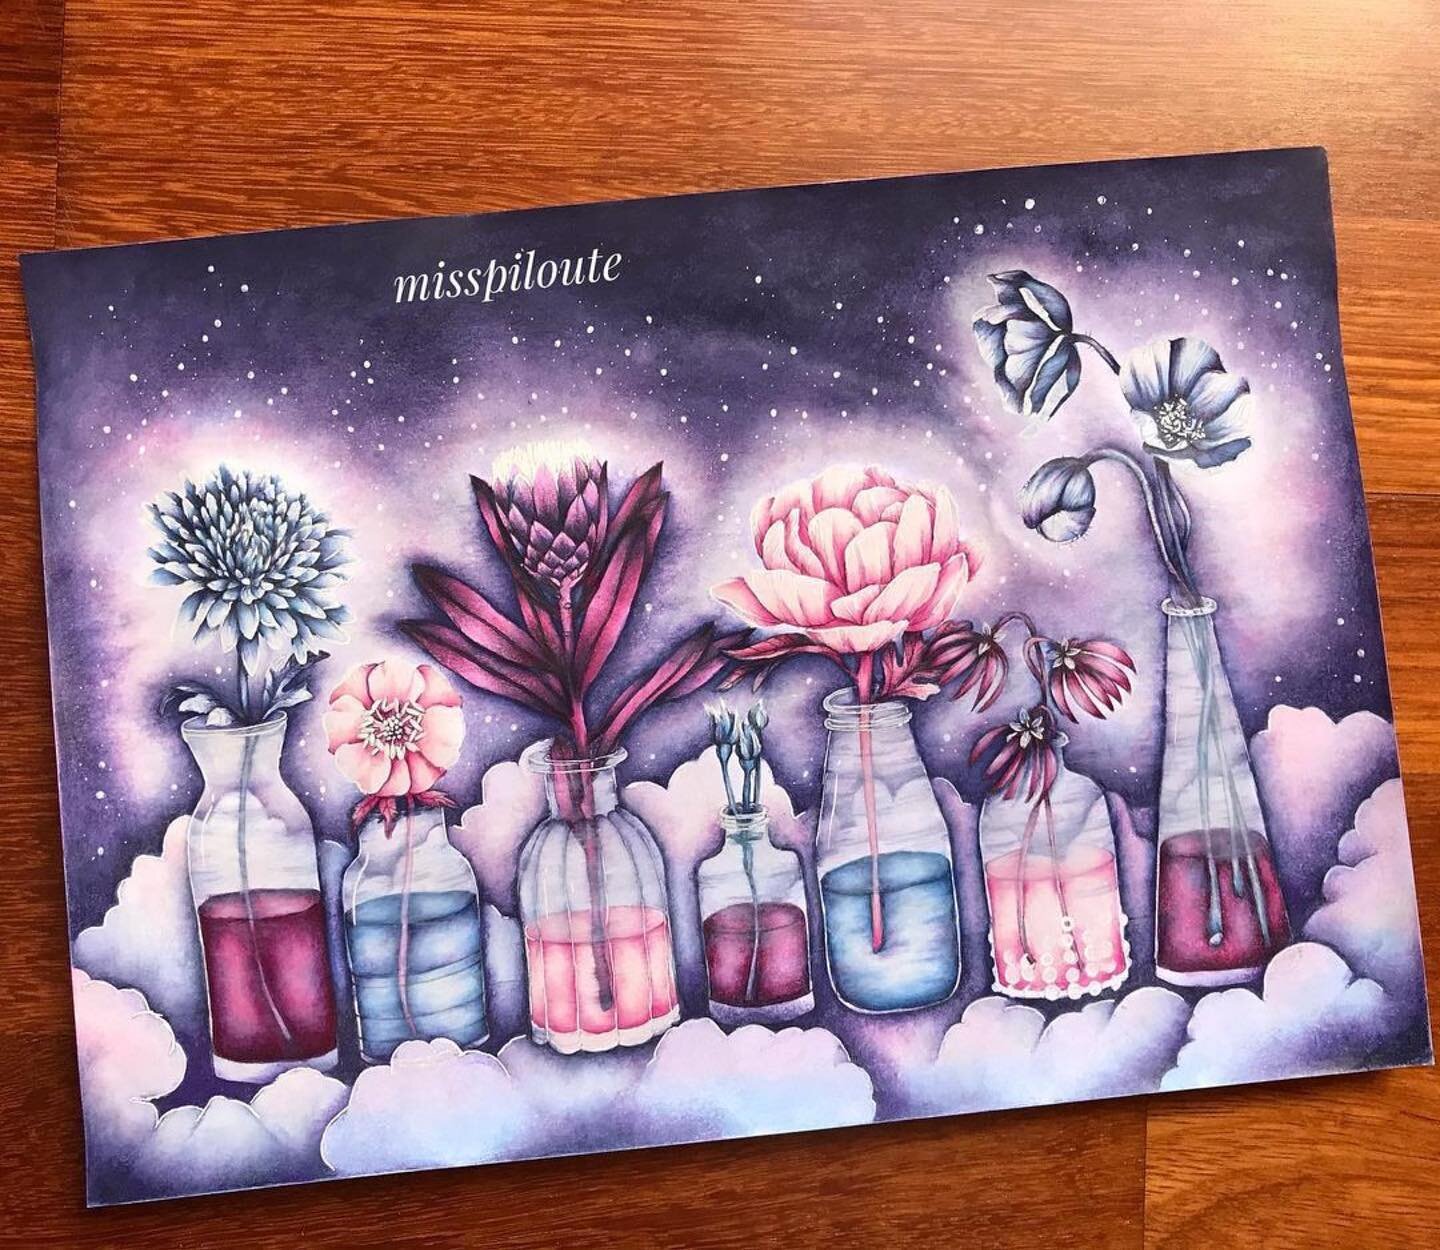 Here is another gorgeous version of No. 10 by the amazing @misspiloute 🌸 I am always so wowed by her colorings!! And I am so glad she was keen to join in the fun - especially with a new baby at home 💗💗
.
Garden Party No. 10 is available at AmberLo